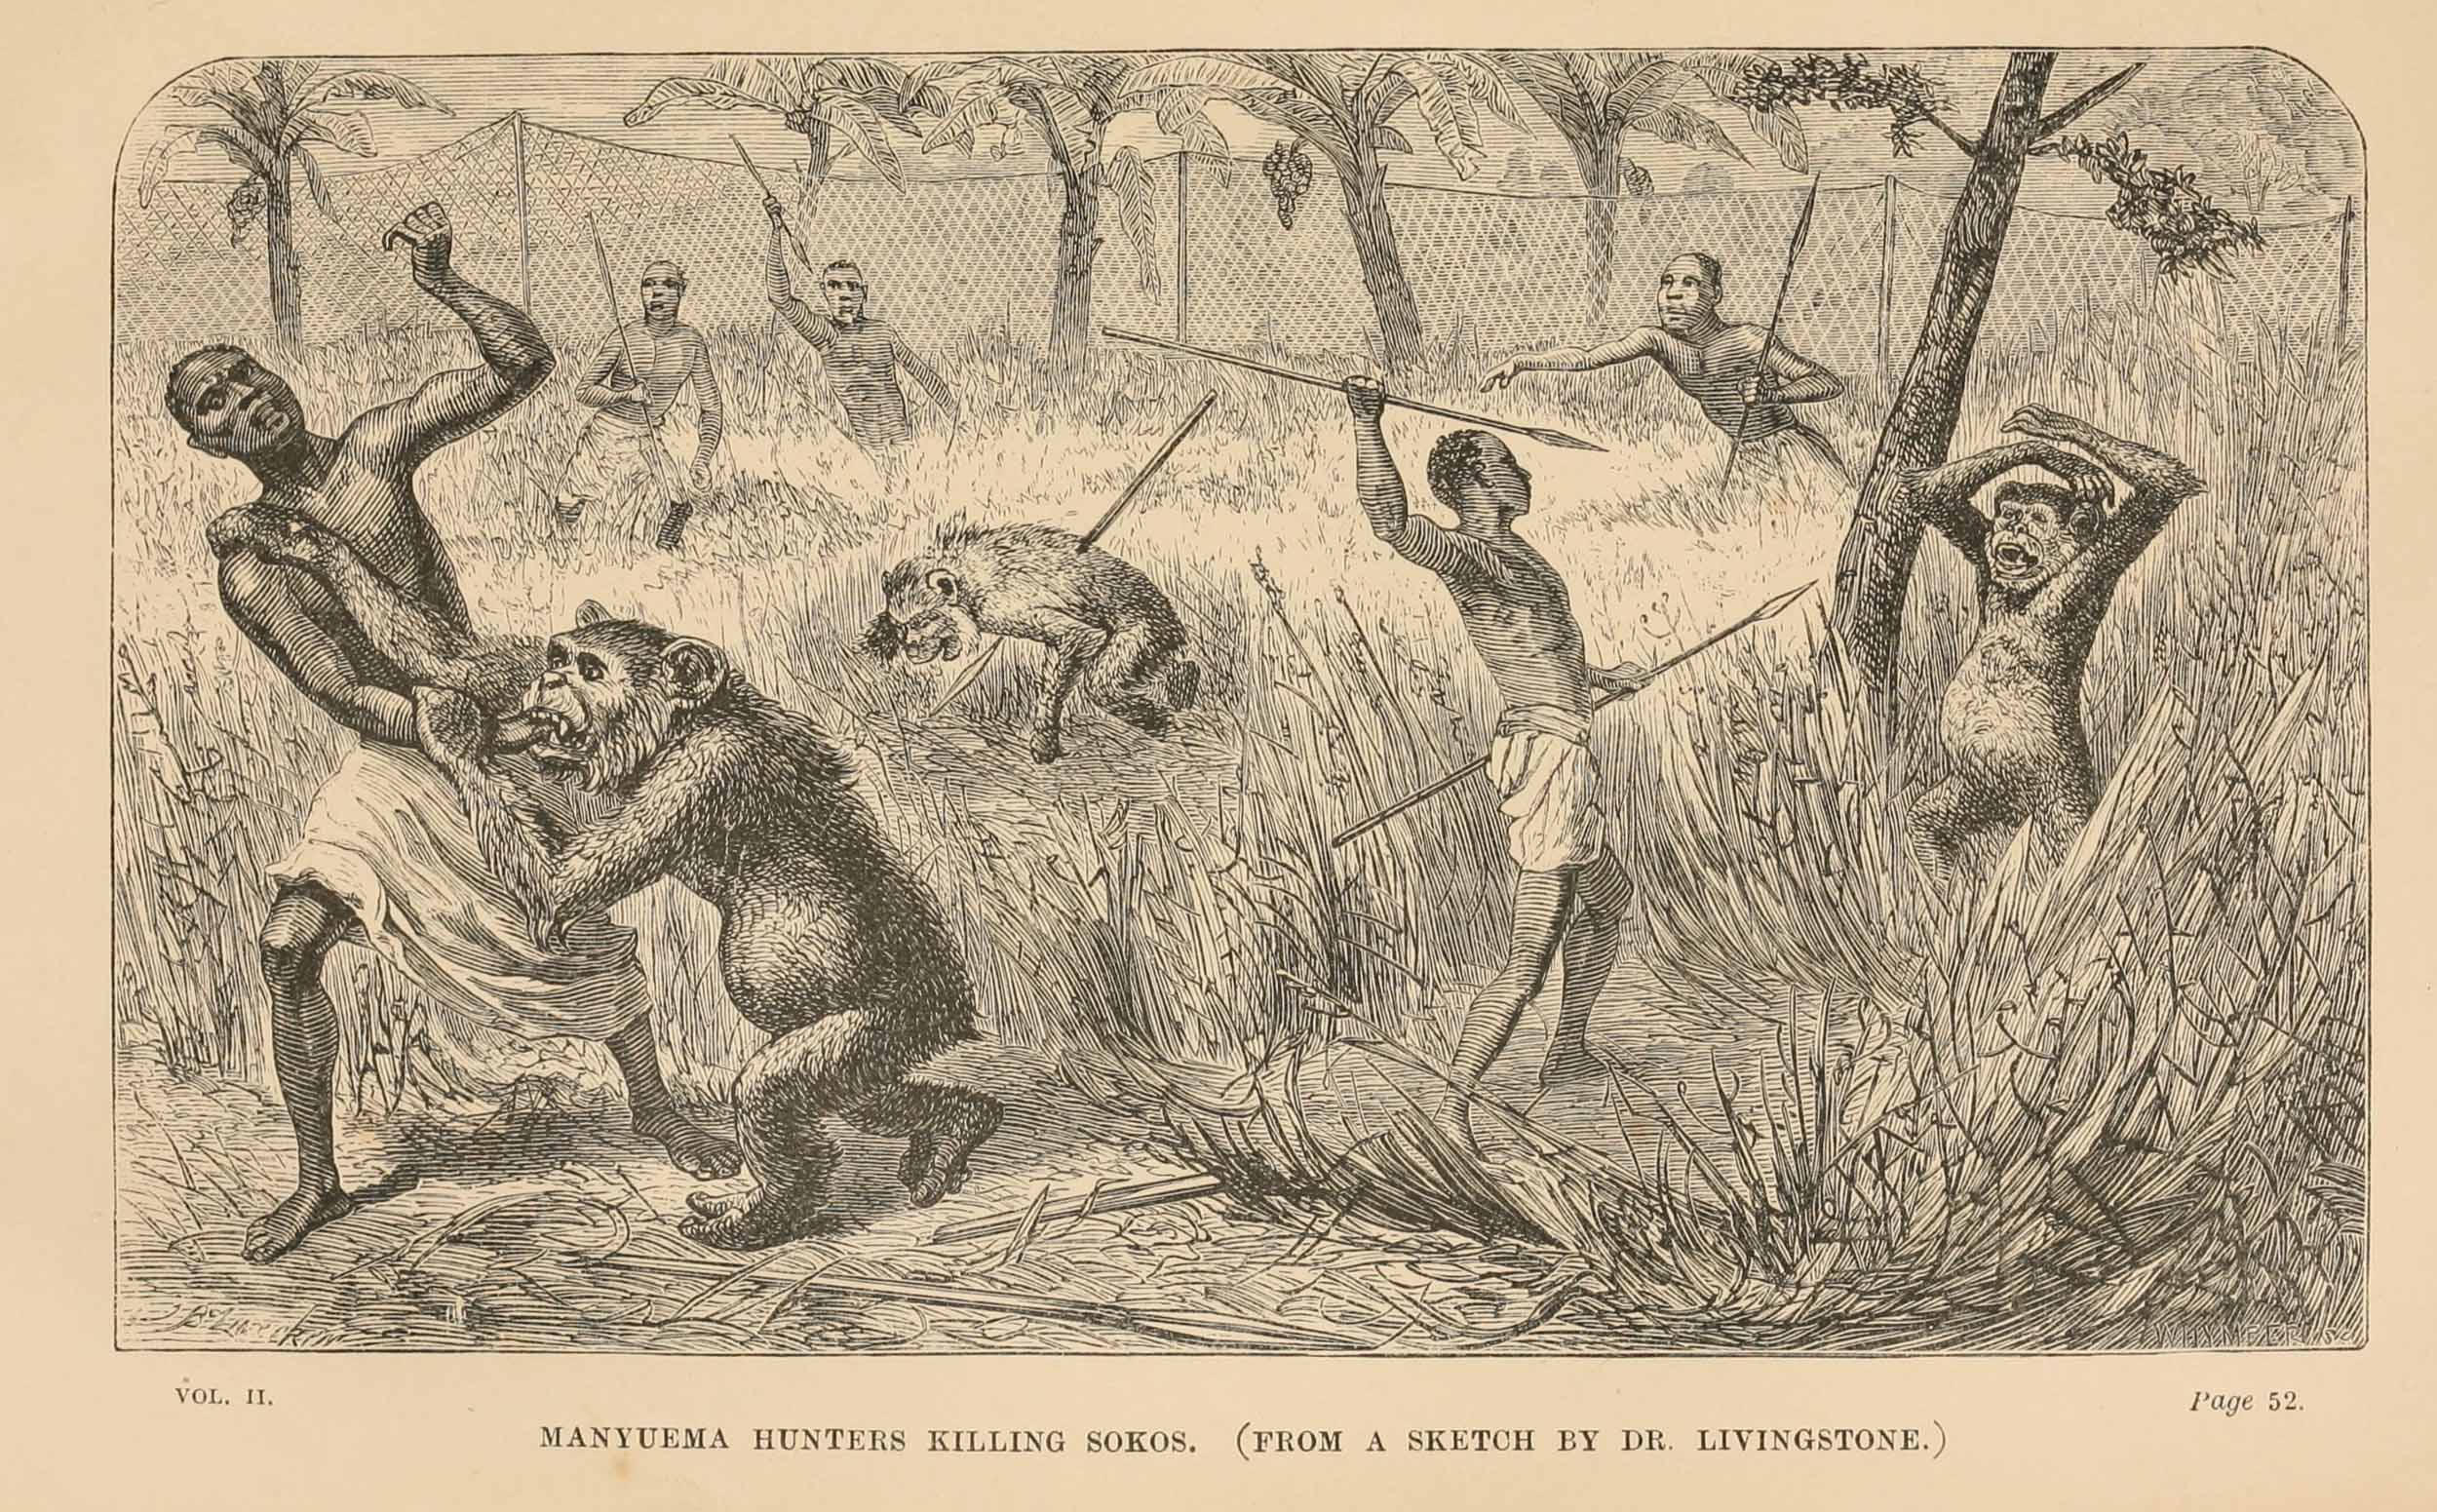 'Manyuema Hunters Killing Sokos. (From a Sketch by Livingstone.)' Illustration from the Last Journals (Livingstone 1874,2:opposite 52). Courtesy of the Internet Archive (https://archive.org/details/lastjournalsofda02hora).